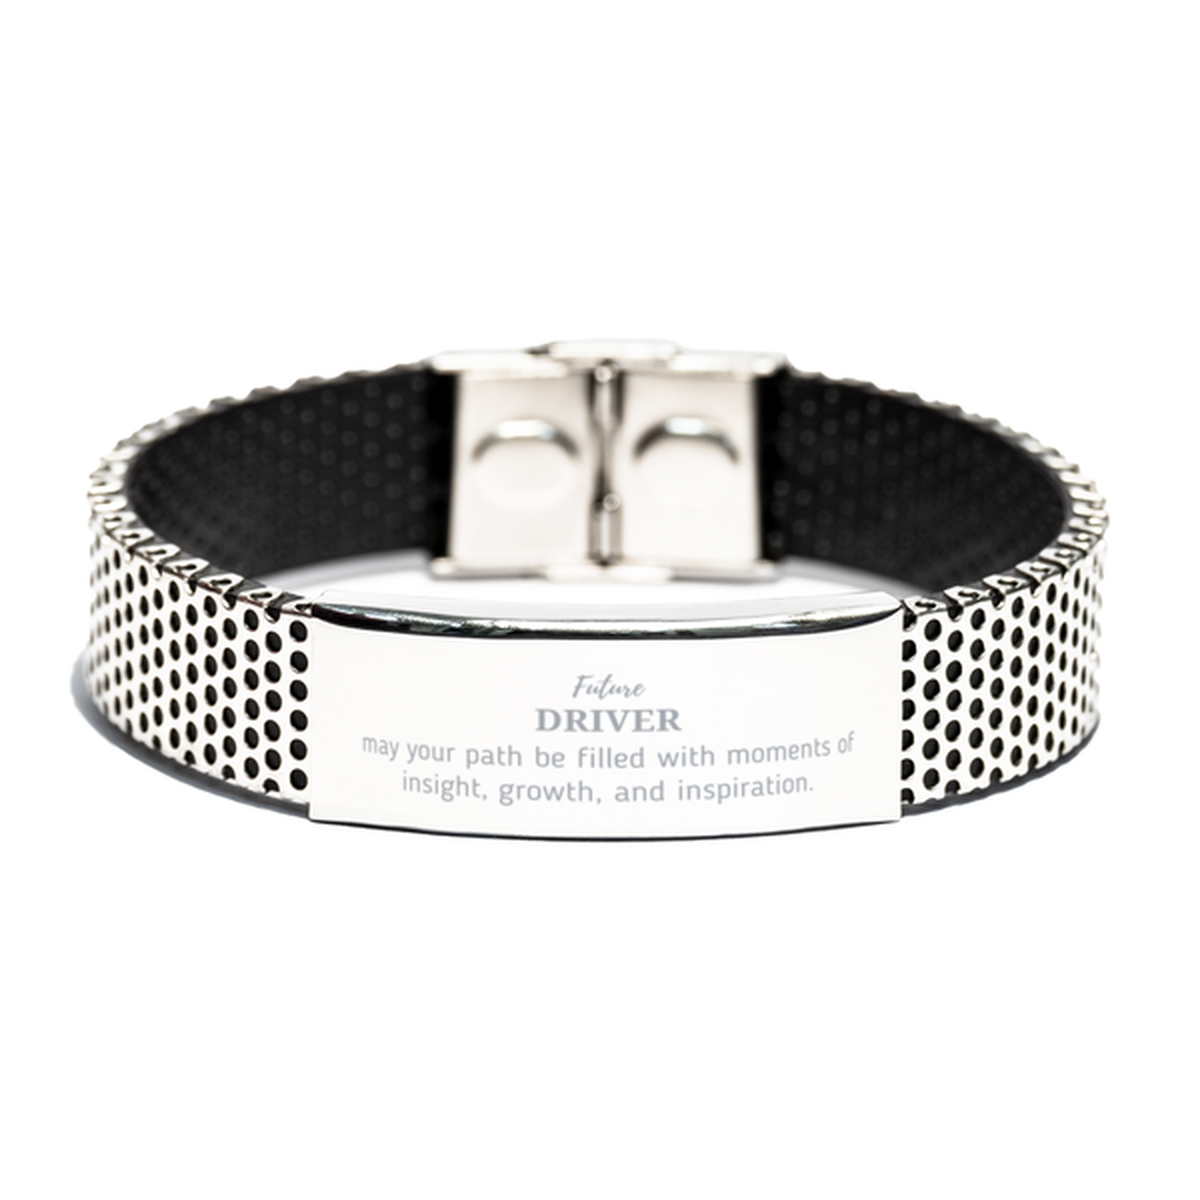 Future Driver Gifts, May your path be filled with moments of insight, Graduation Gifts for New Driver, Christmas Unique Stainless Steel Bracelet For Men, Women, Friends